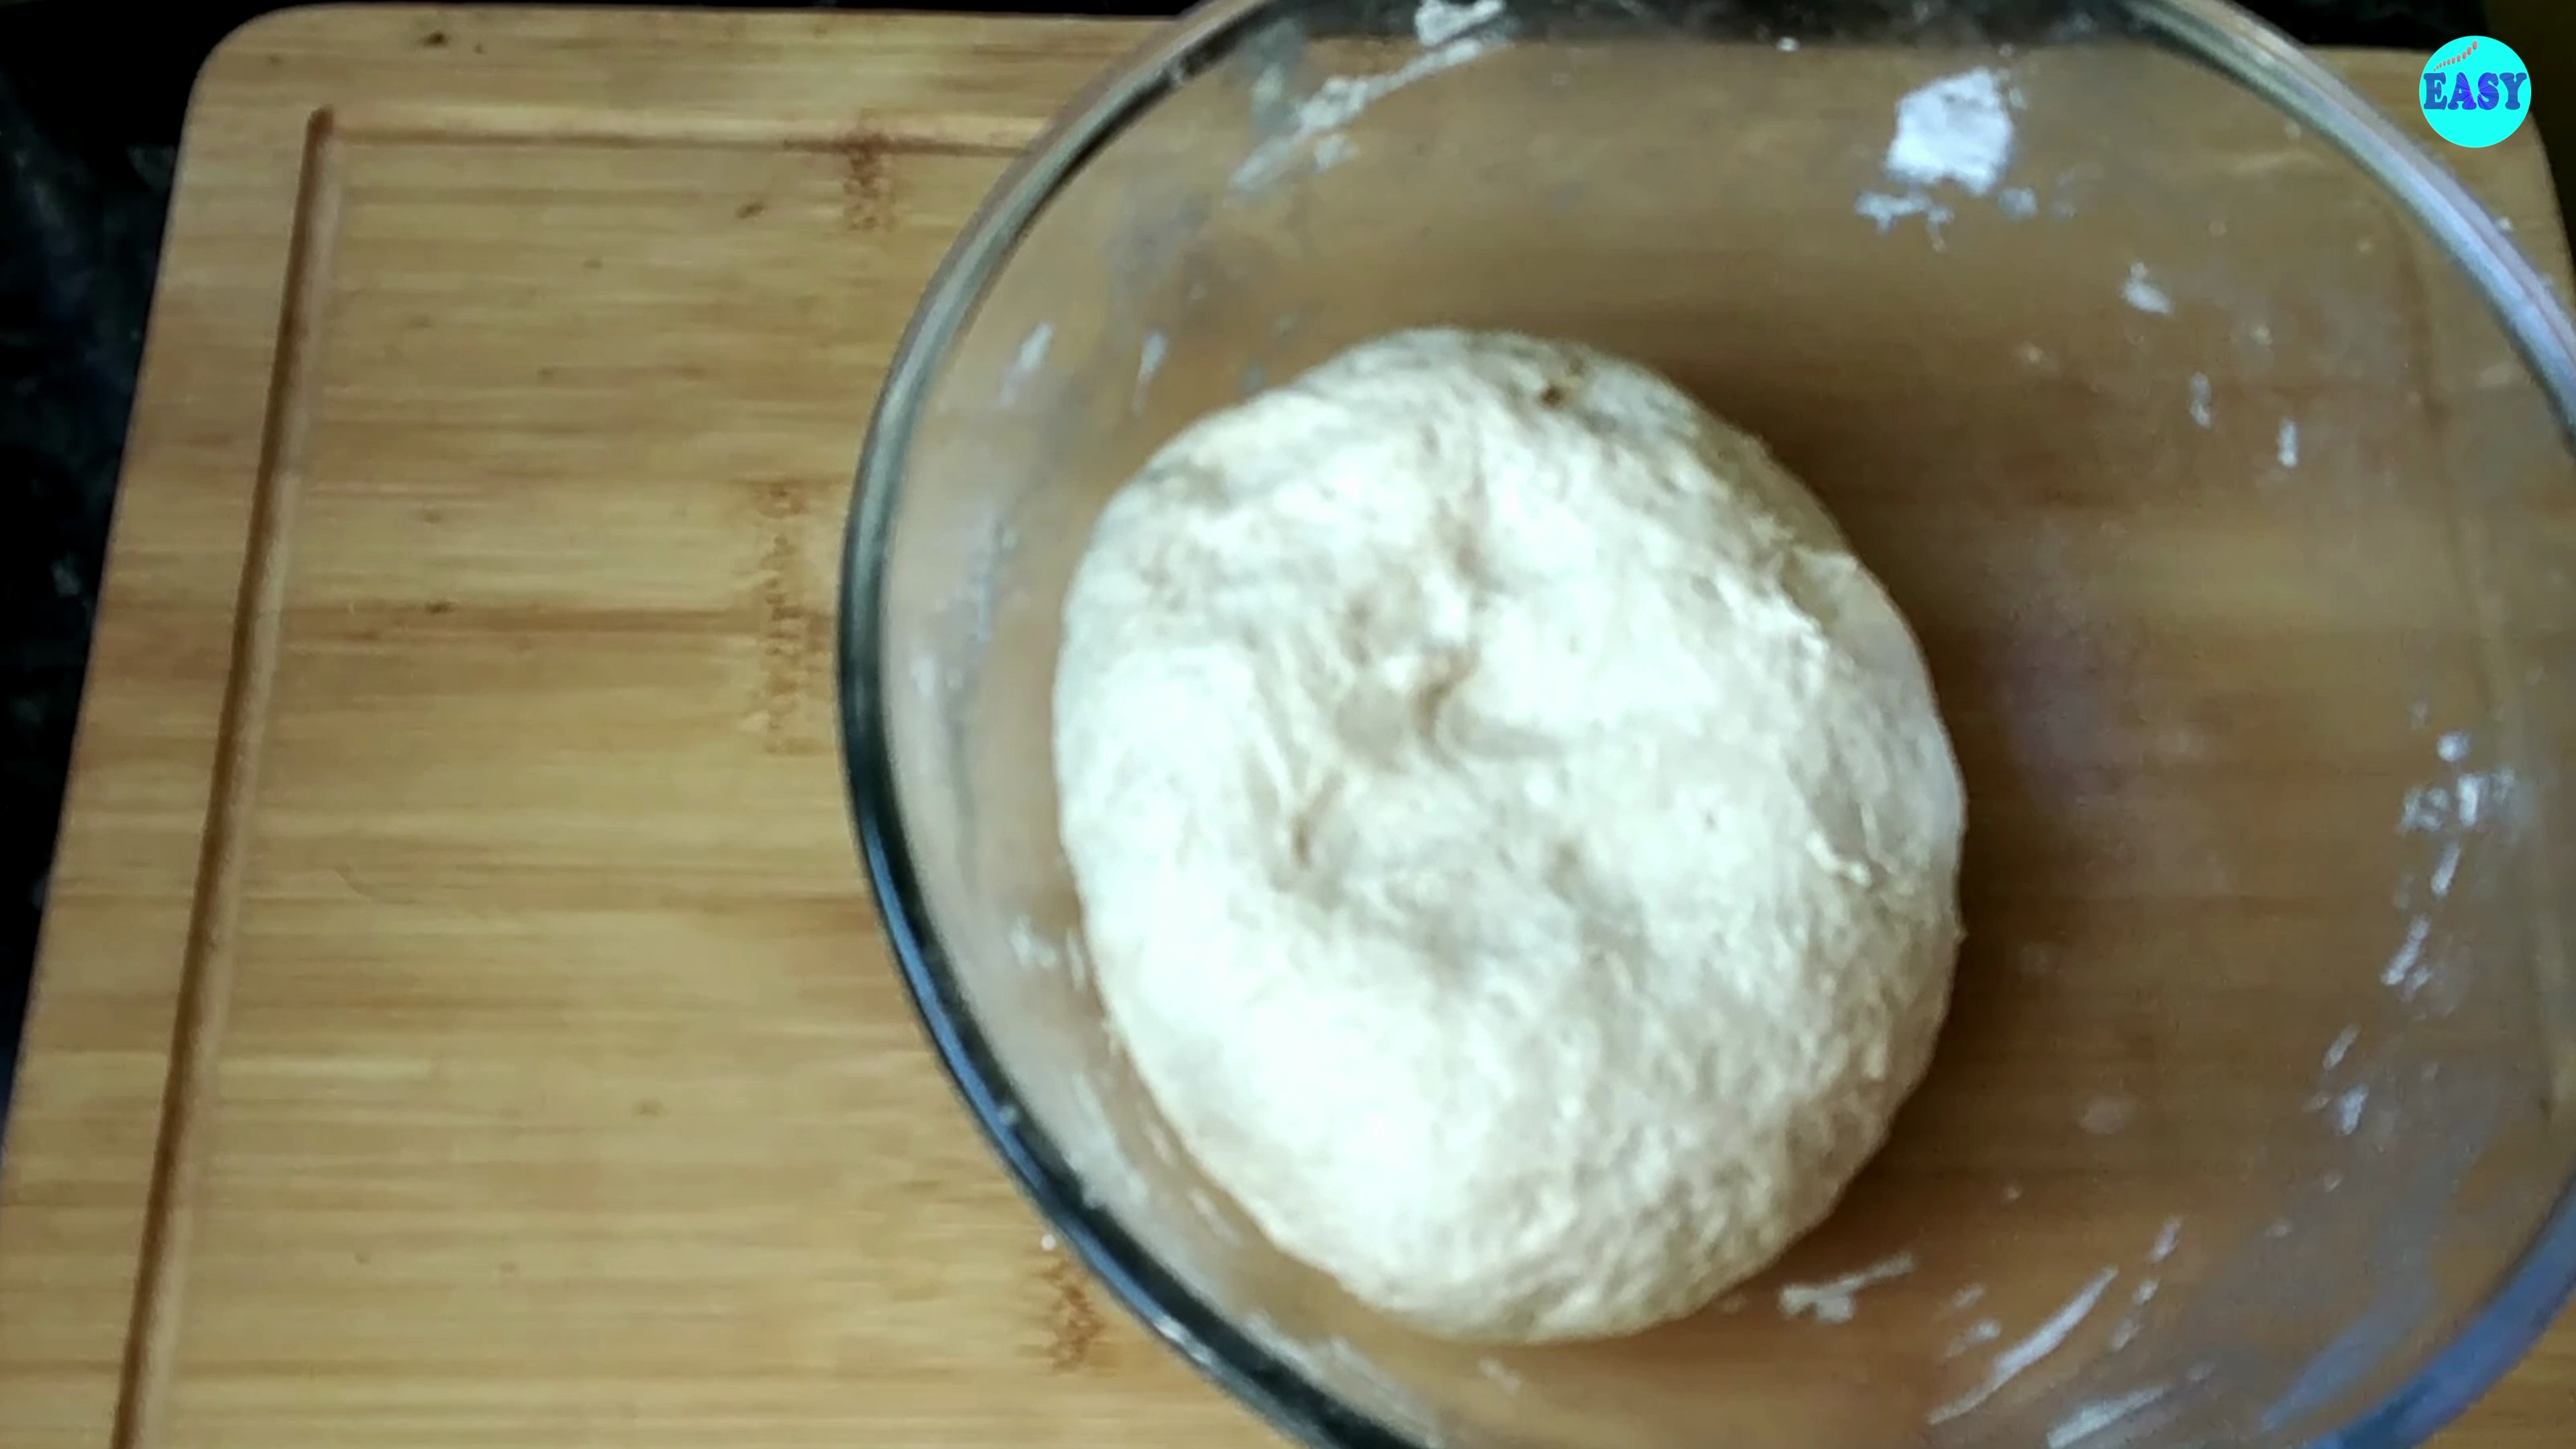 Step 4 - Place the dough in a greased bowl, cover it, and let it rise in a warm place for about an hour.